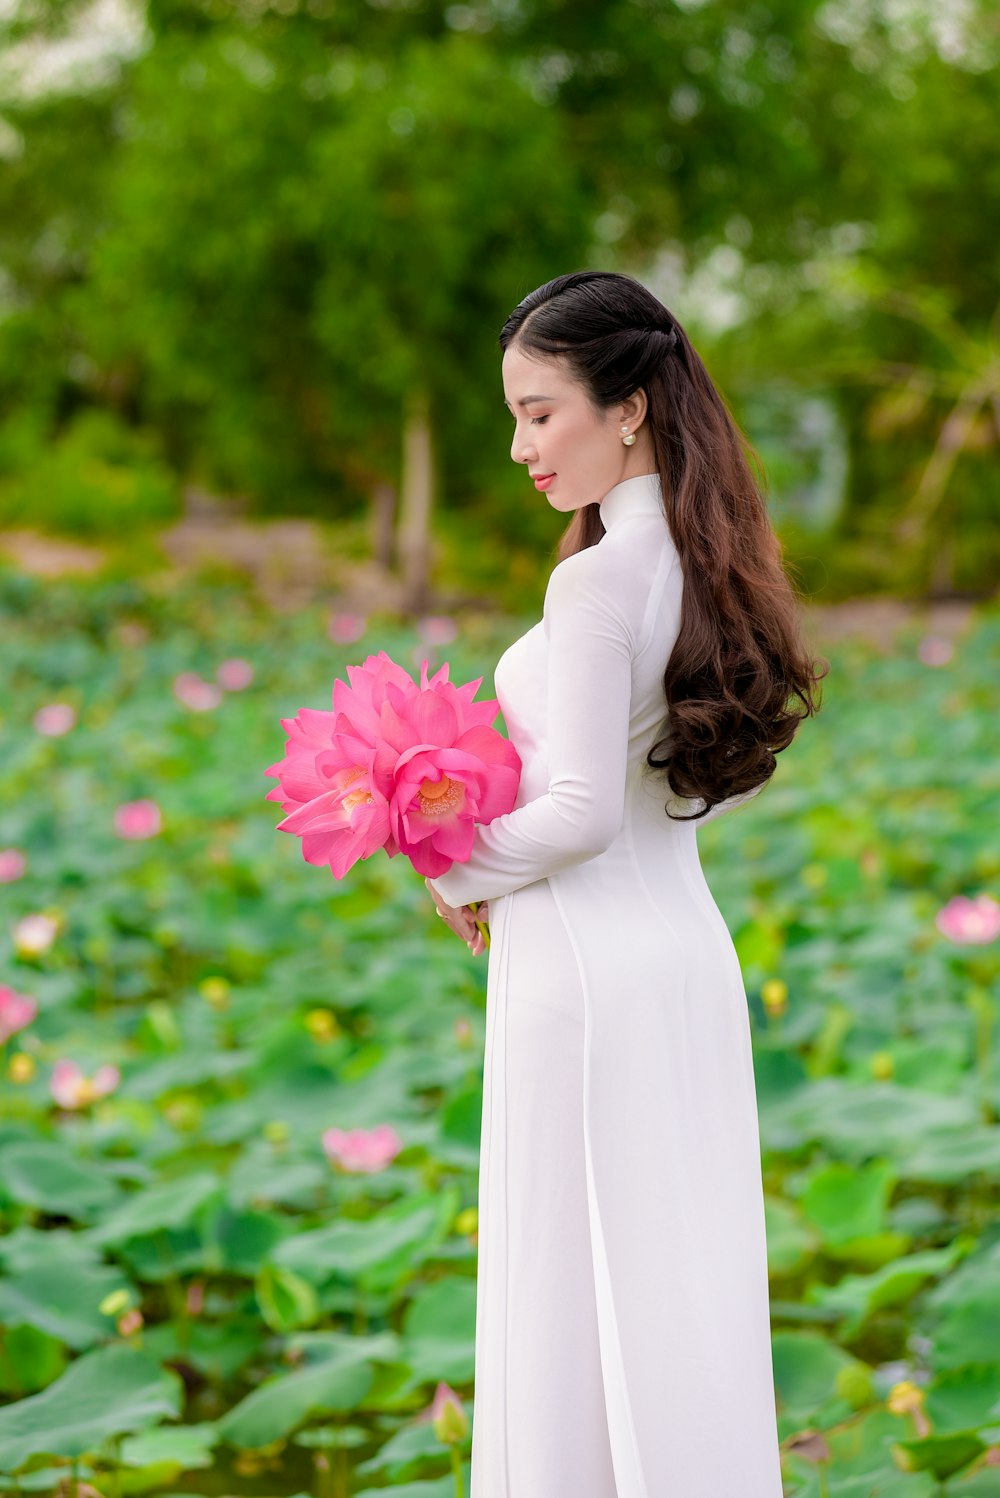 woman in white dress holding pink flower bouquet